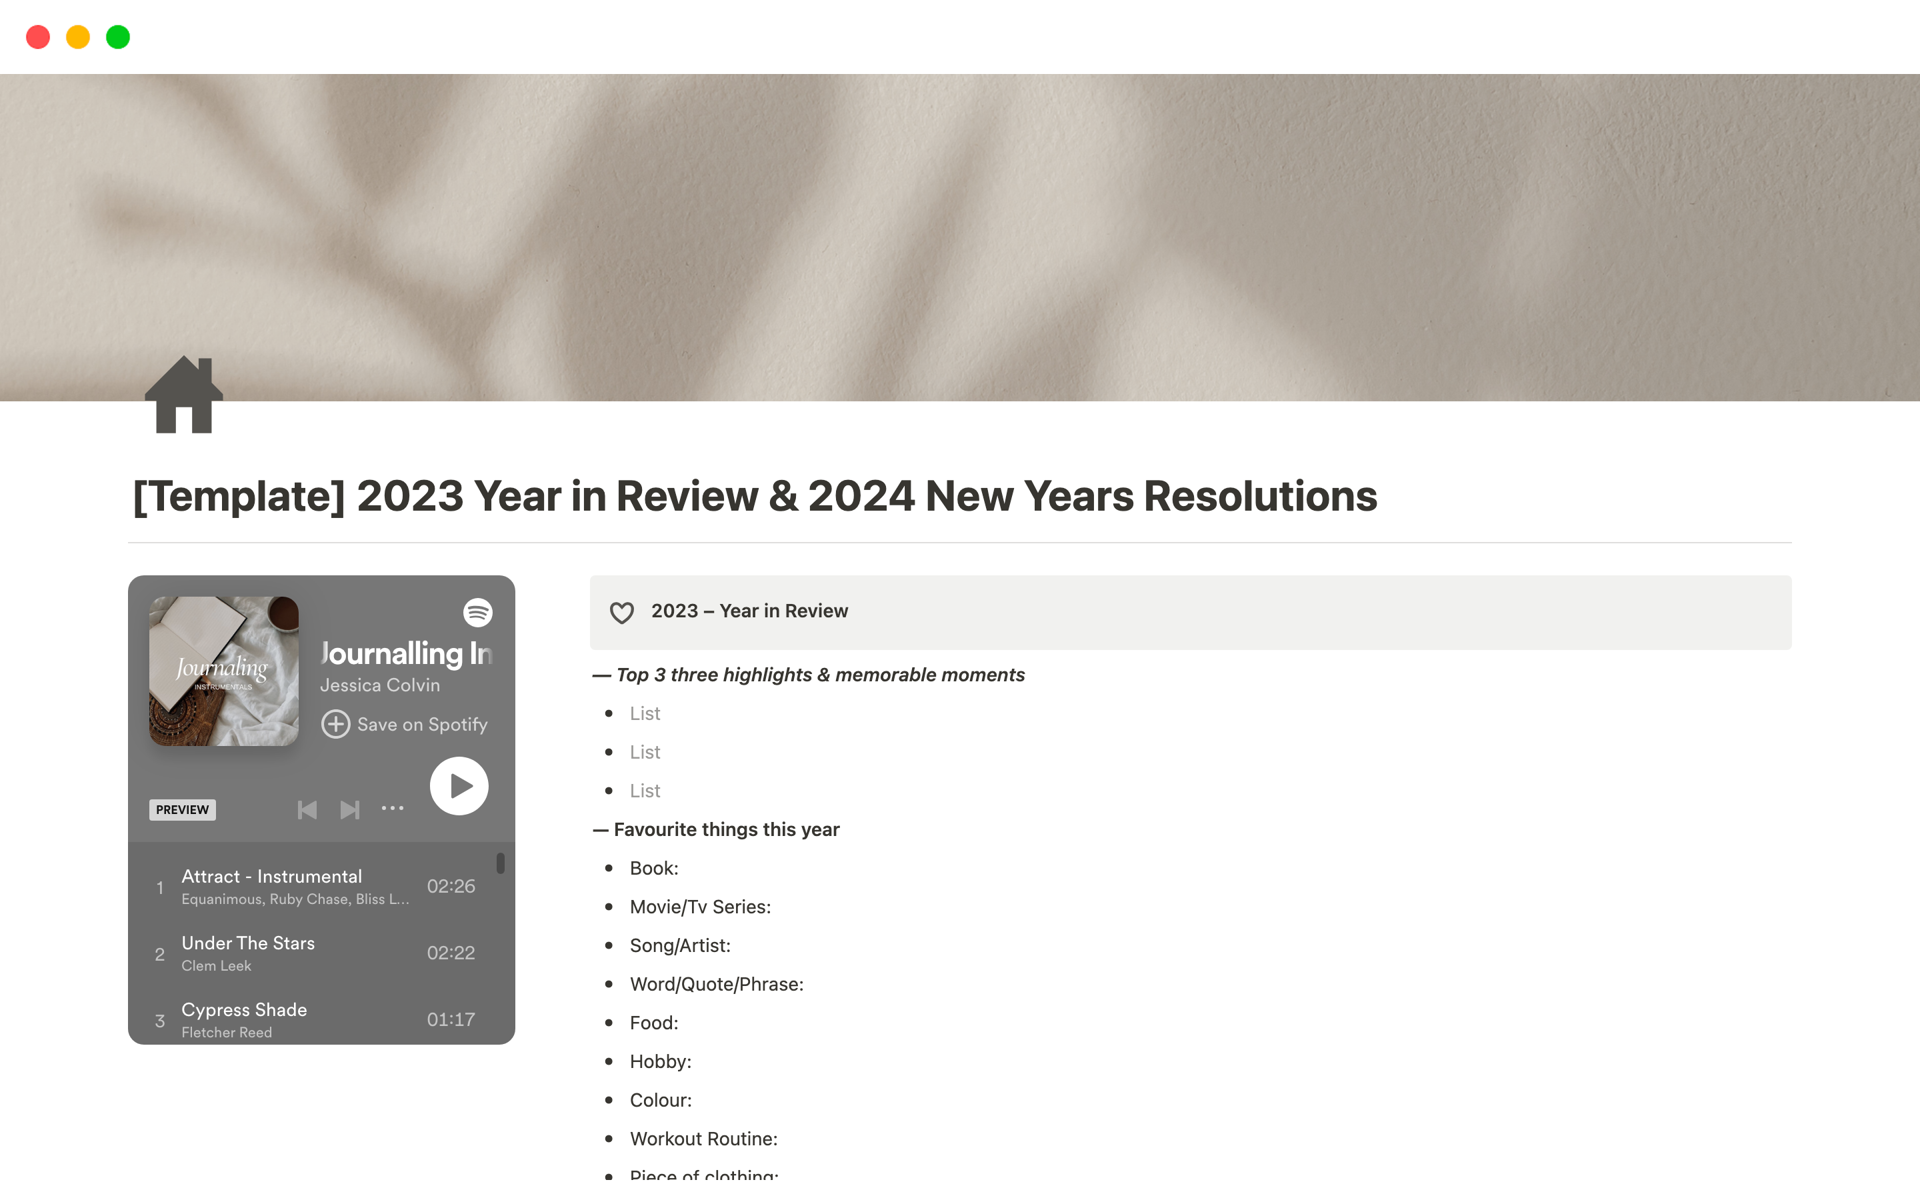 A template preview for 2023 Year in Review & 2024 New Years Resolutions